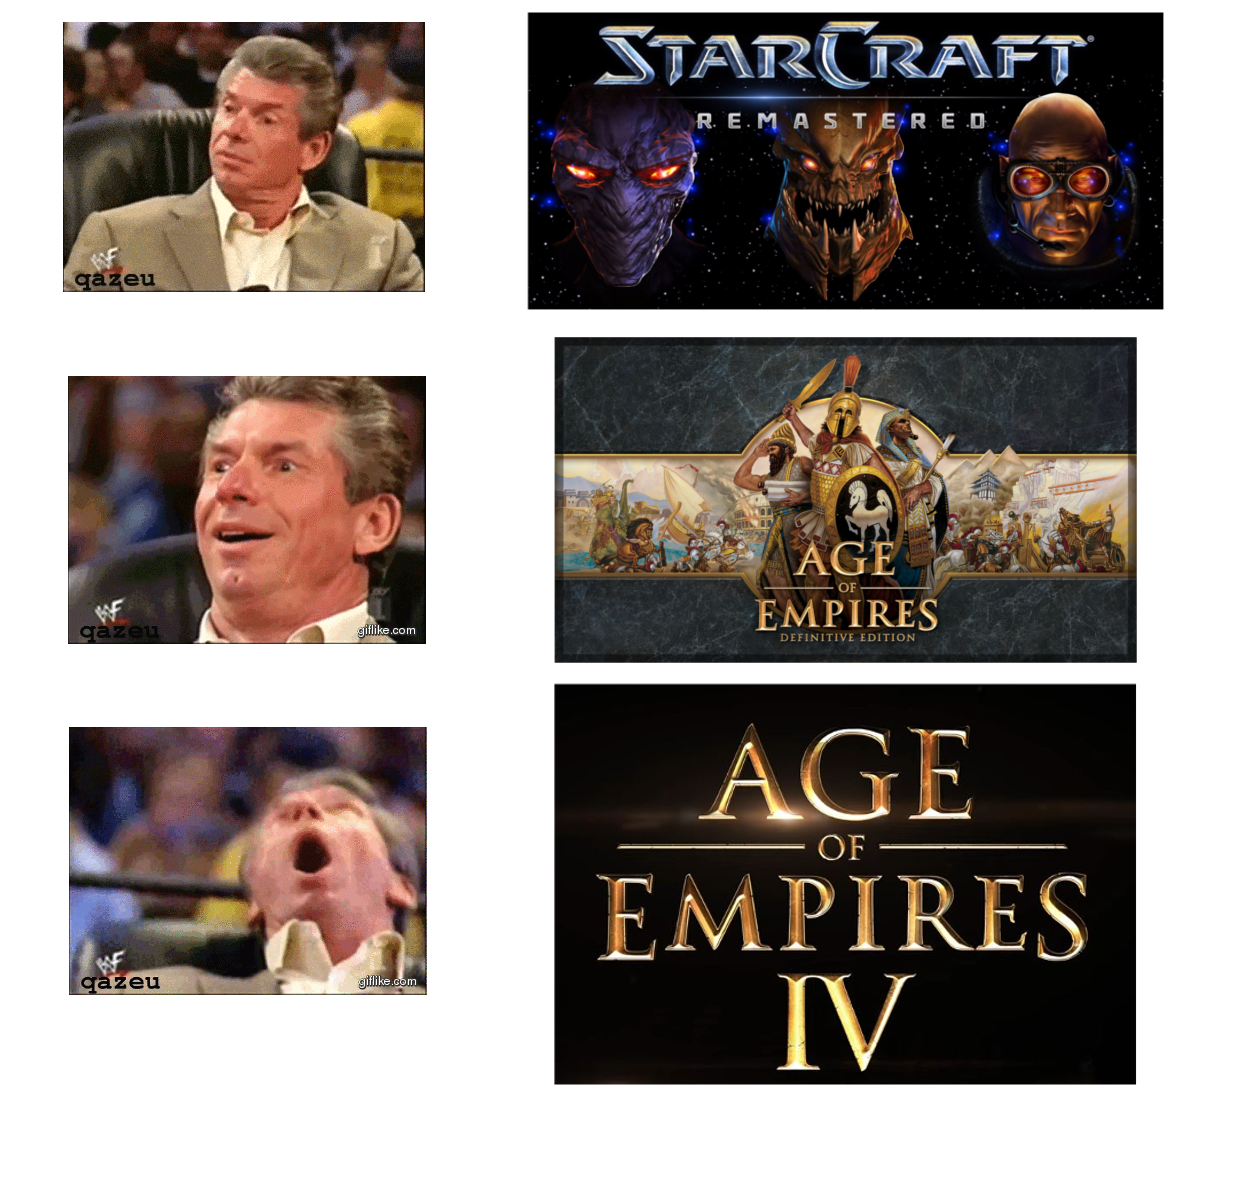 age of empires 4 memes - Starcraft Remastereo Empires Of Age Empires V